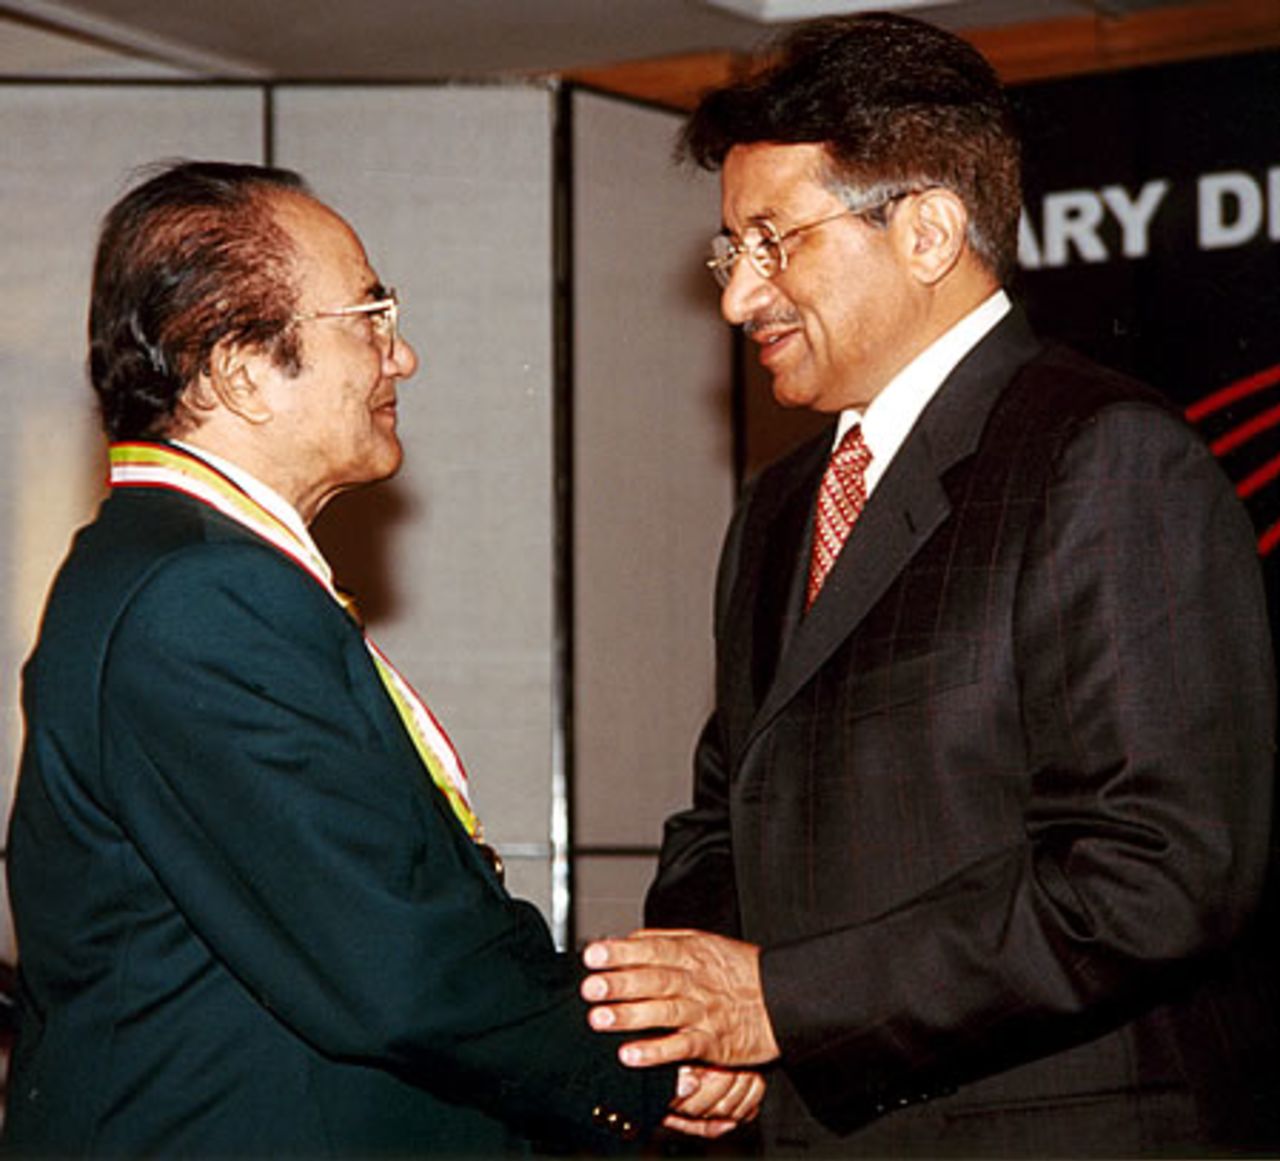 Hanif Mohammad receiving his medal from Pakistan president during the Golden Jubilee of Test Cricket Gala, Islamabad, September 16, 2003.